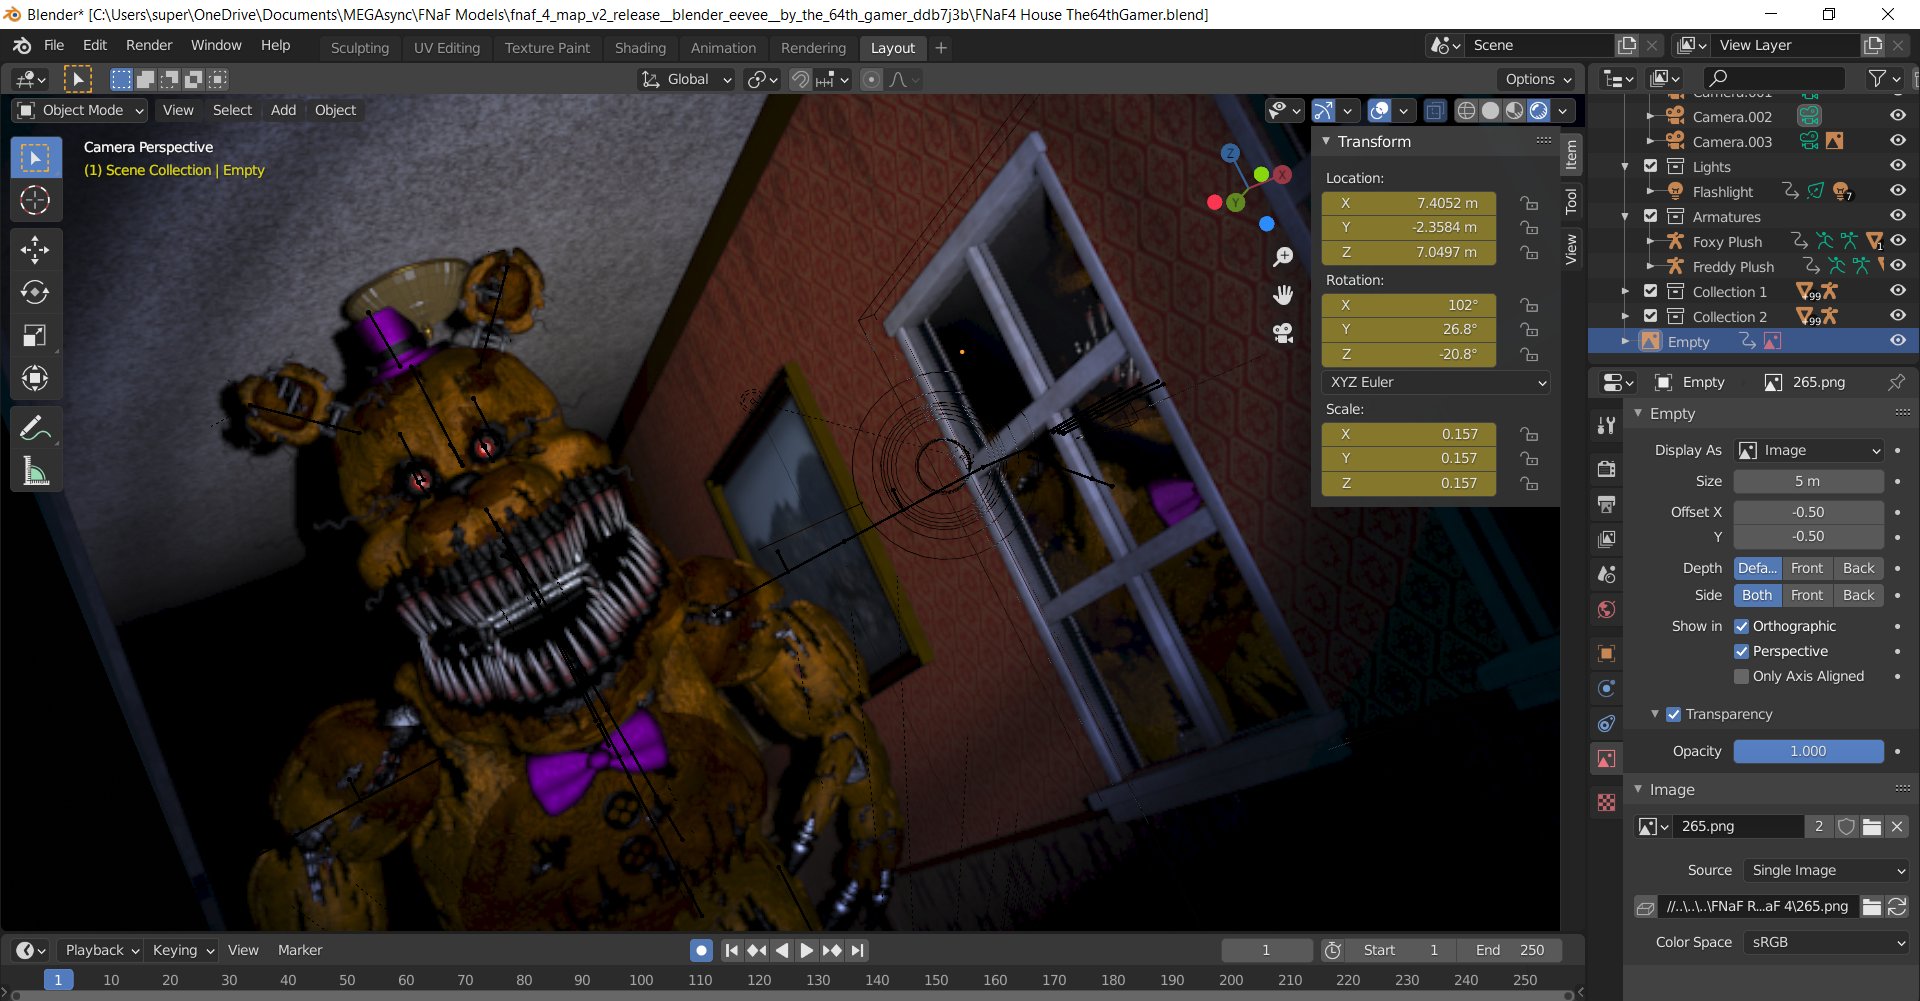 AstroMonster, Kisser of Beasts on X: So I matched Nightmare Fredbear with  one of his hallway renders and found out that he is upsettingly large, and  that there's no way that his